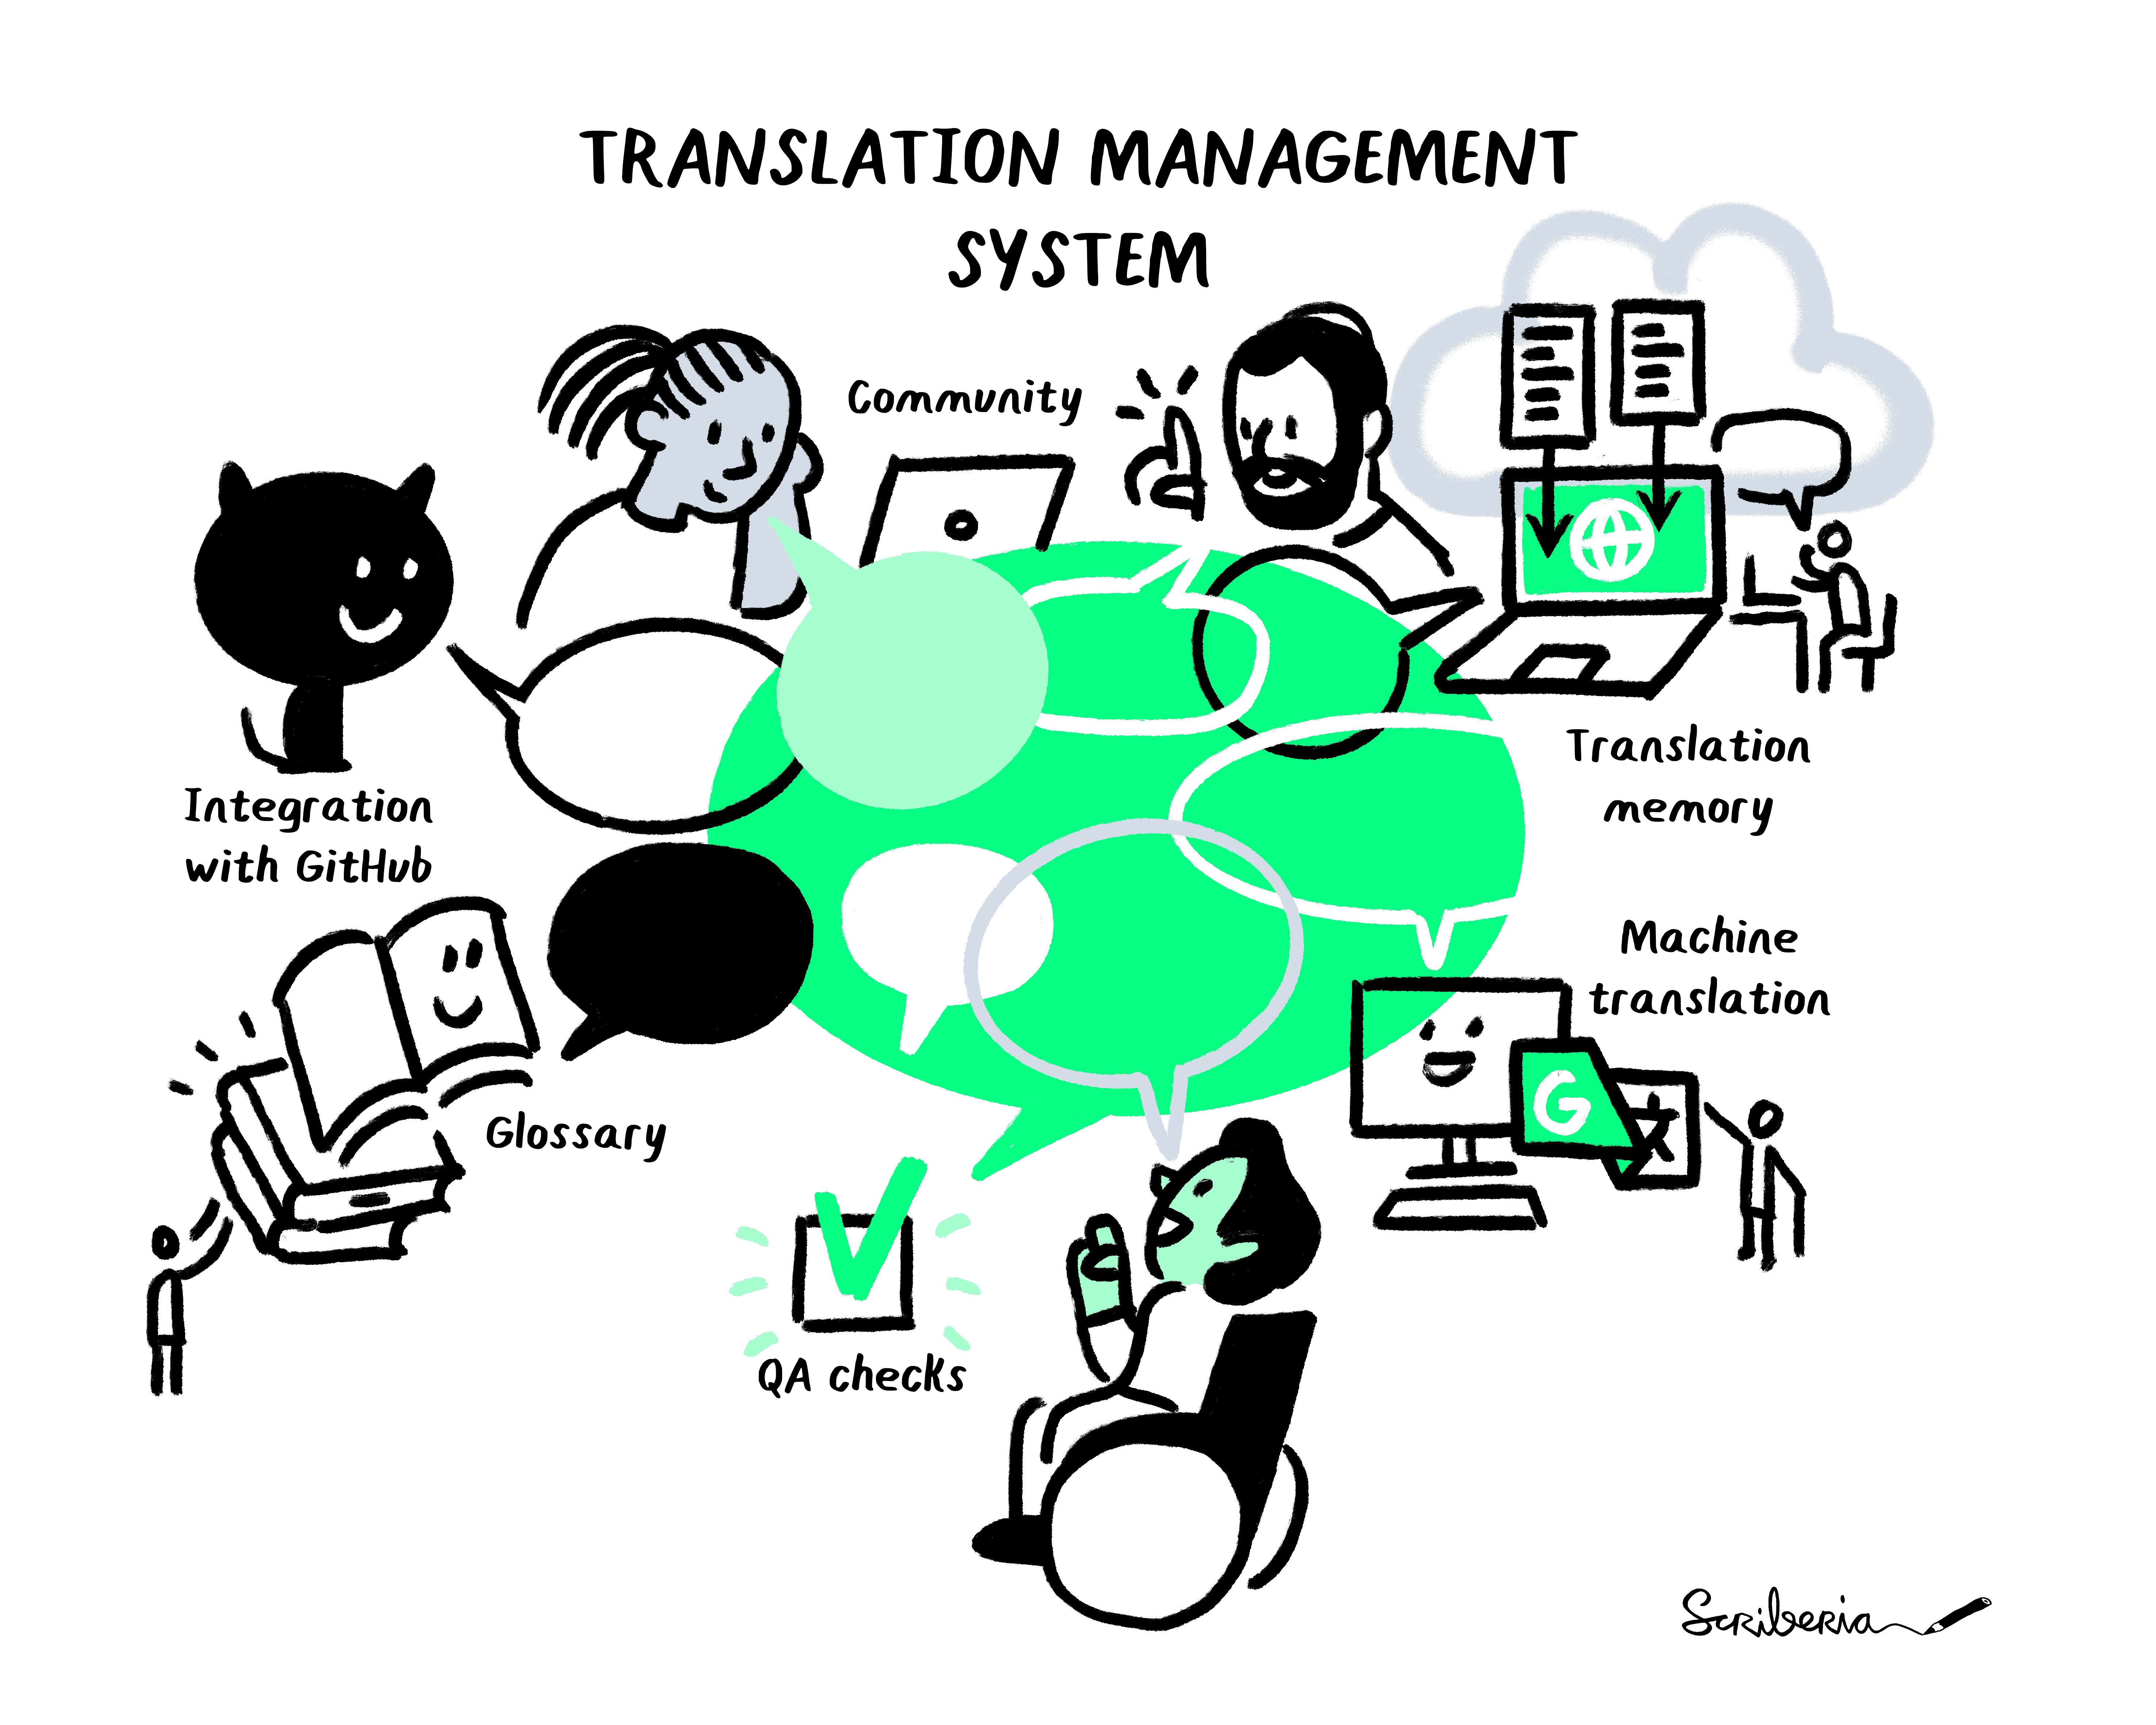 This illustration shows the features of a Translation Management System. It contains Translation Memory, Machine Translation, glossary, QA checks, integration with GitHub, and some community features that facilitate collaboration.